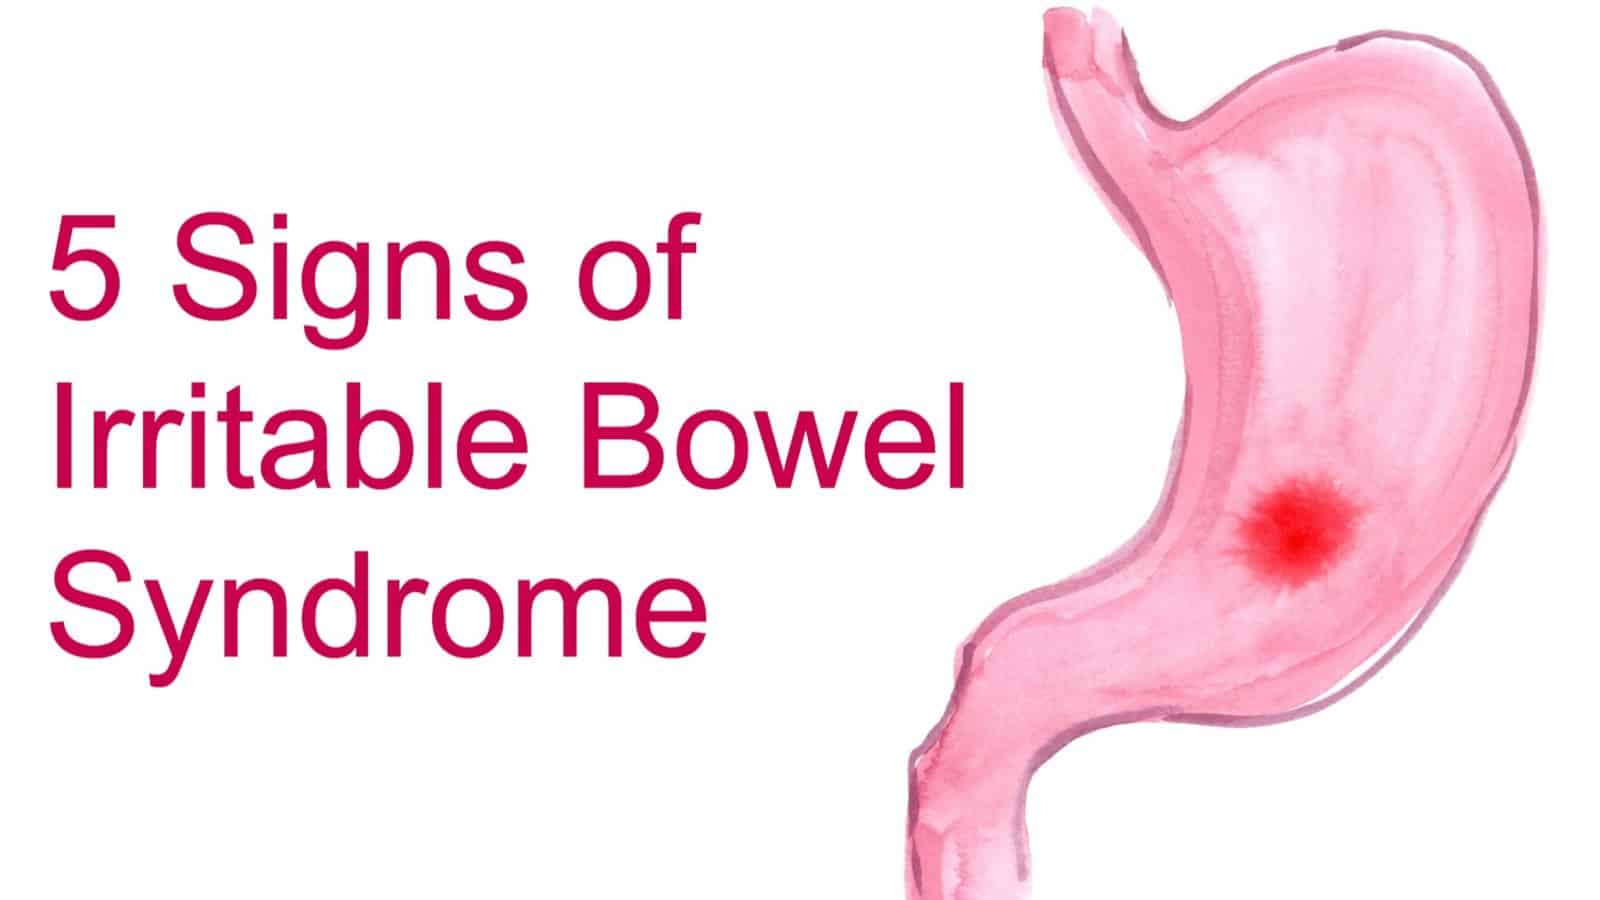 5 Signs of Irritable Bowel Syndrome